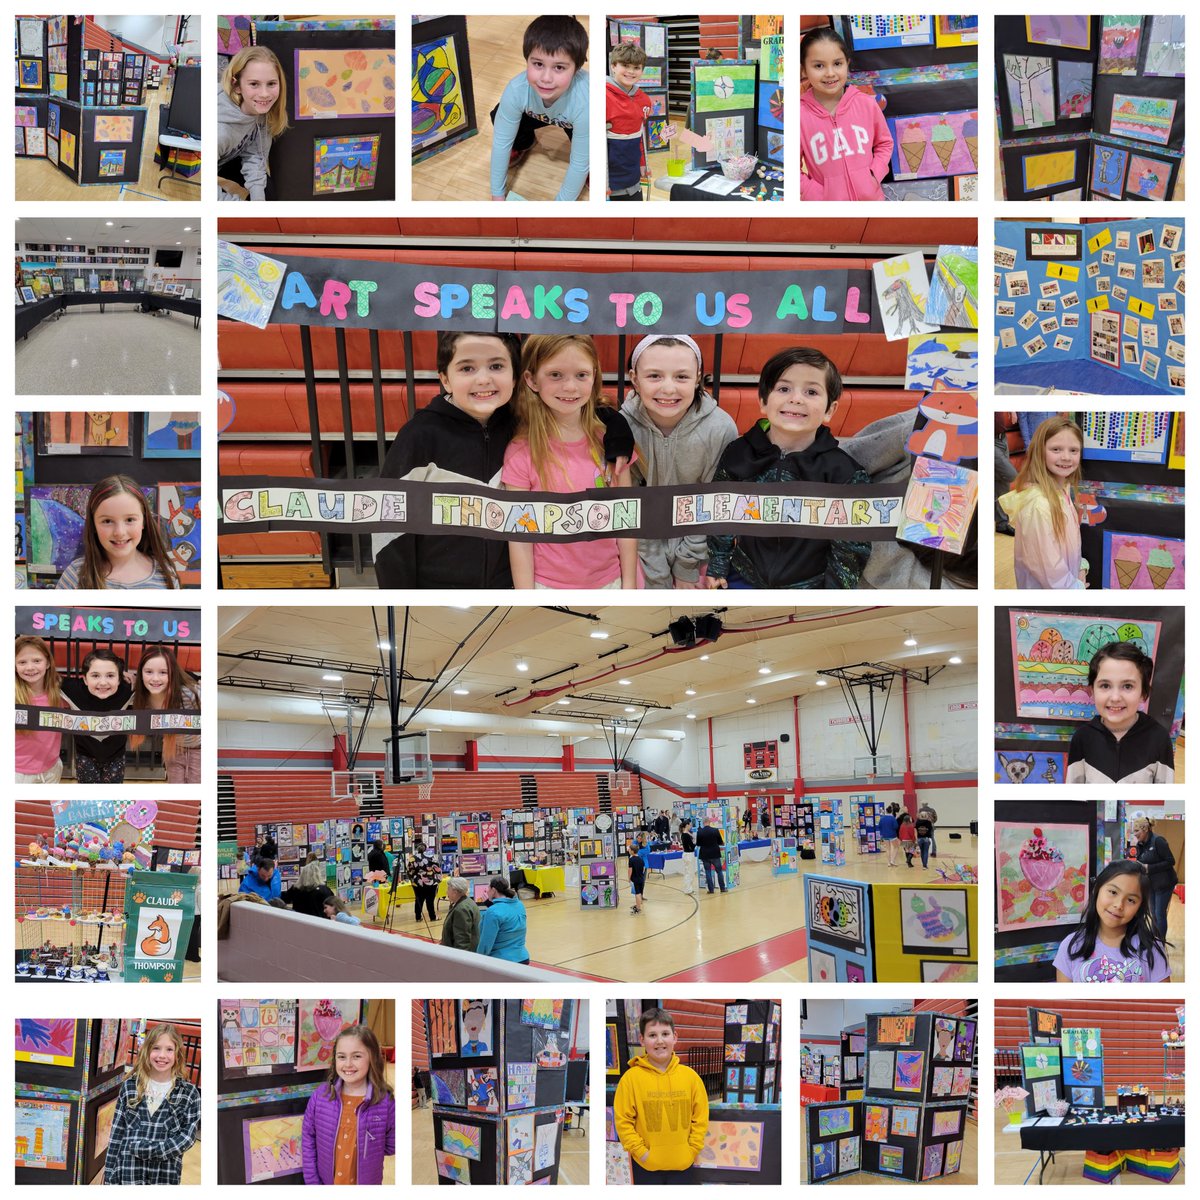 Happy Youth Art Month, Day 24!  First night of the FCPS Art Festival was so amazing!!  Thank you to all the artists, families & staff that came to support the Arts!!  My heart is so full!! #fcps1artsyam2023 #vaartedyam23 @ArtsFcps1 @Thompson__Foxes